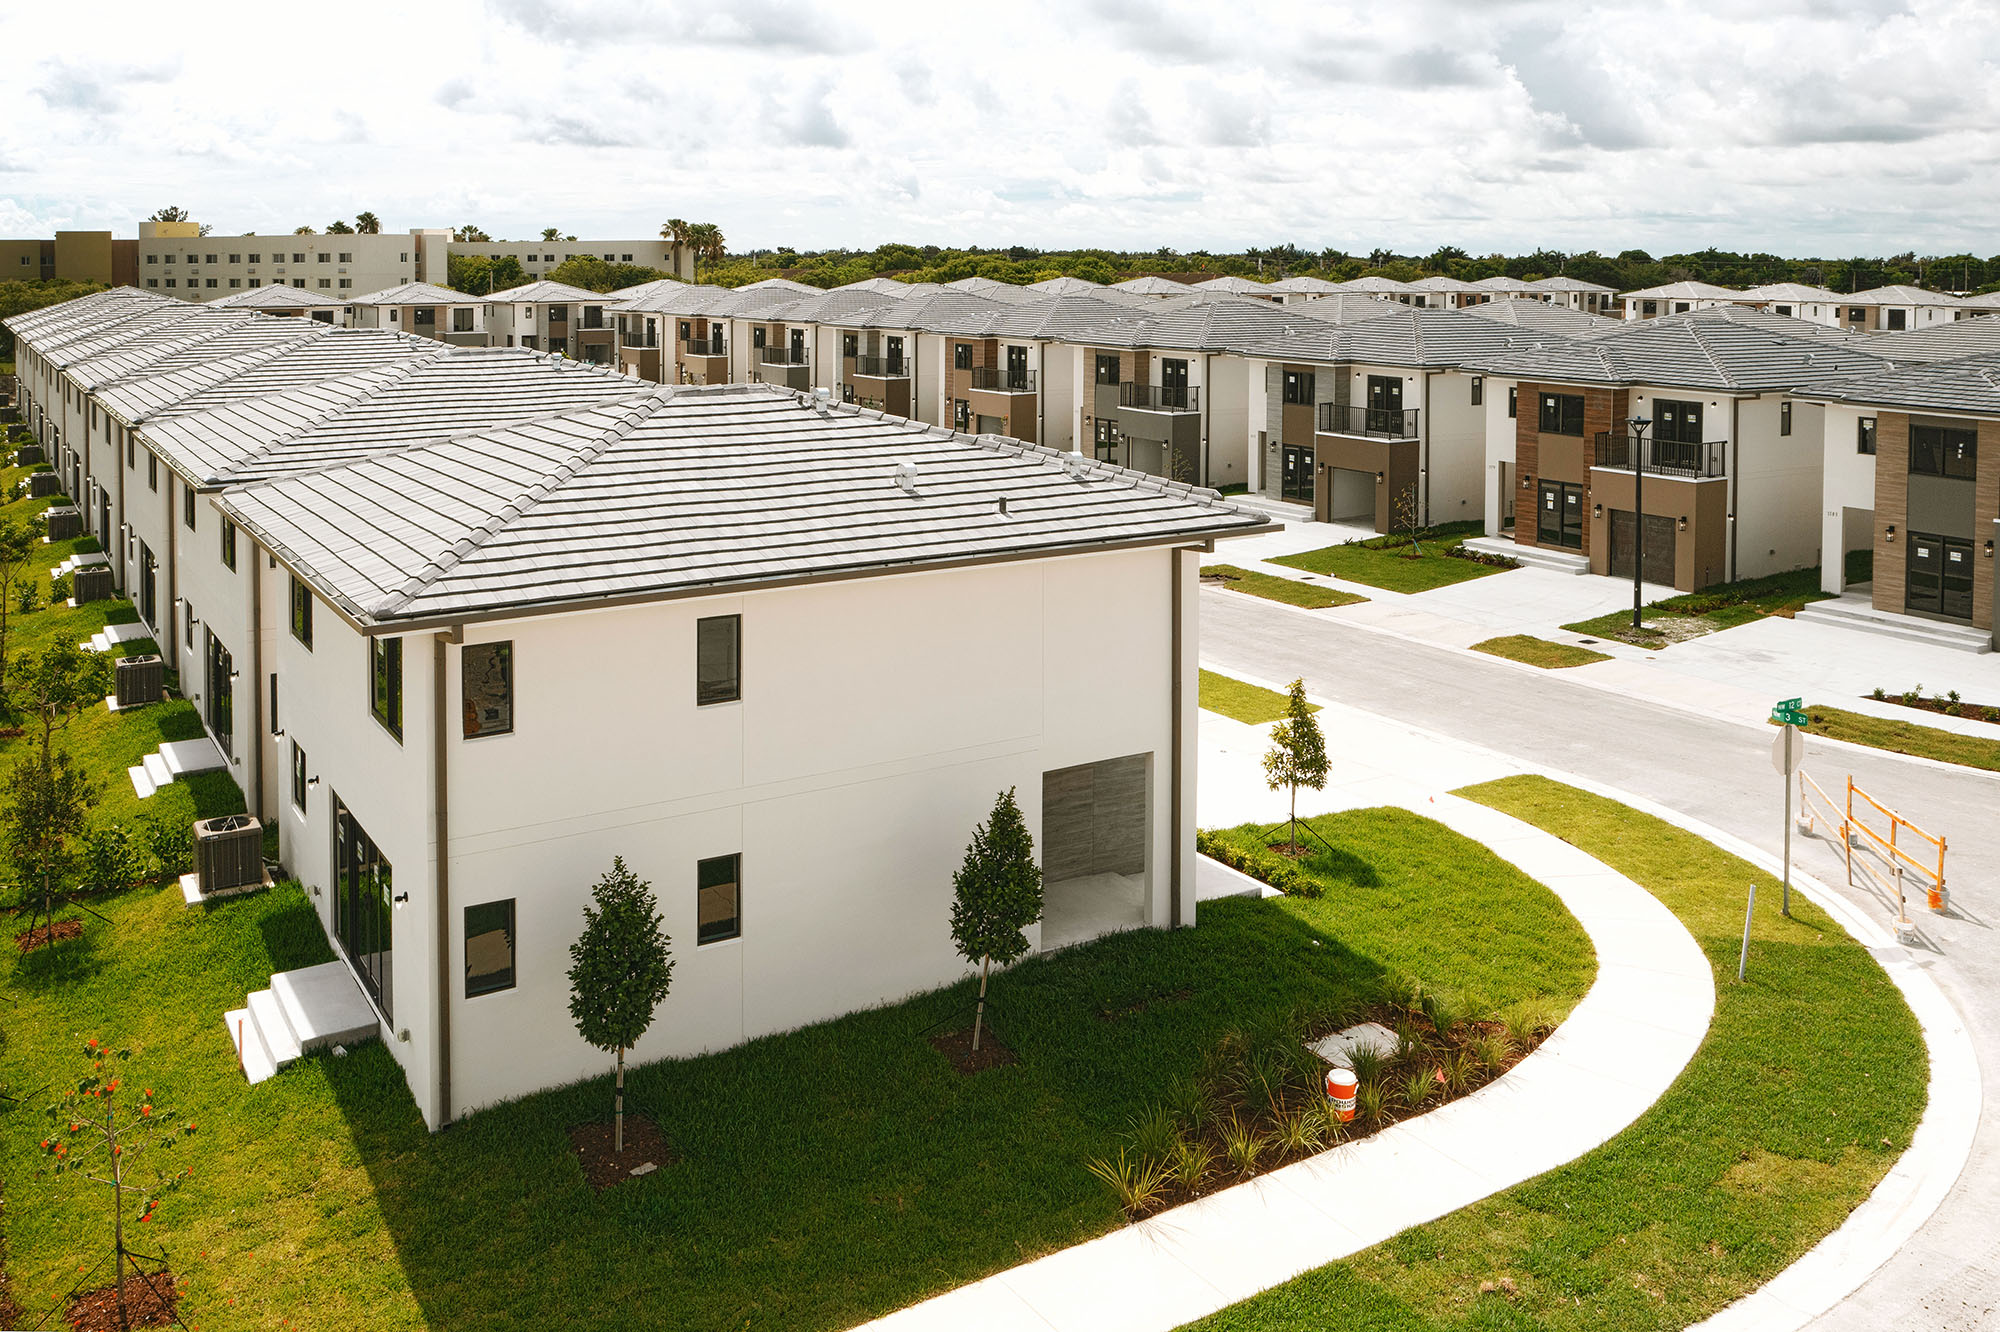 Onx Homes community built via offsite manufacturing